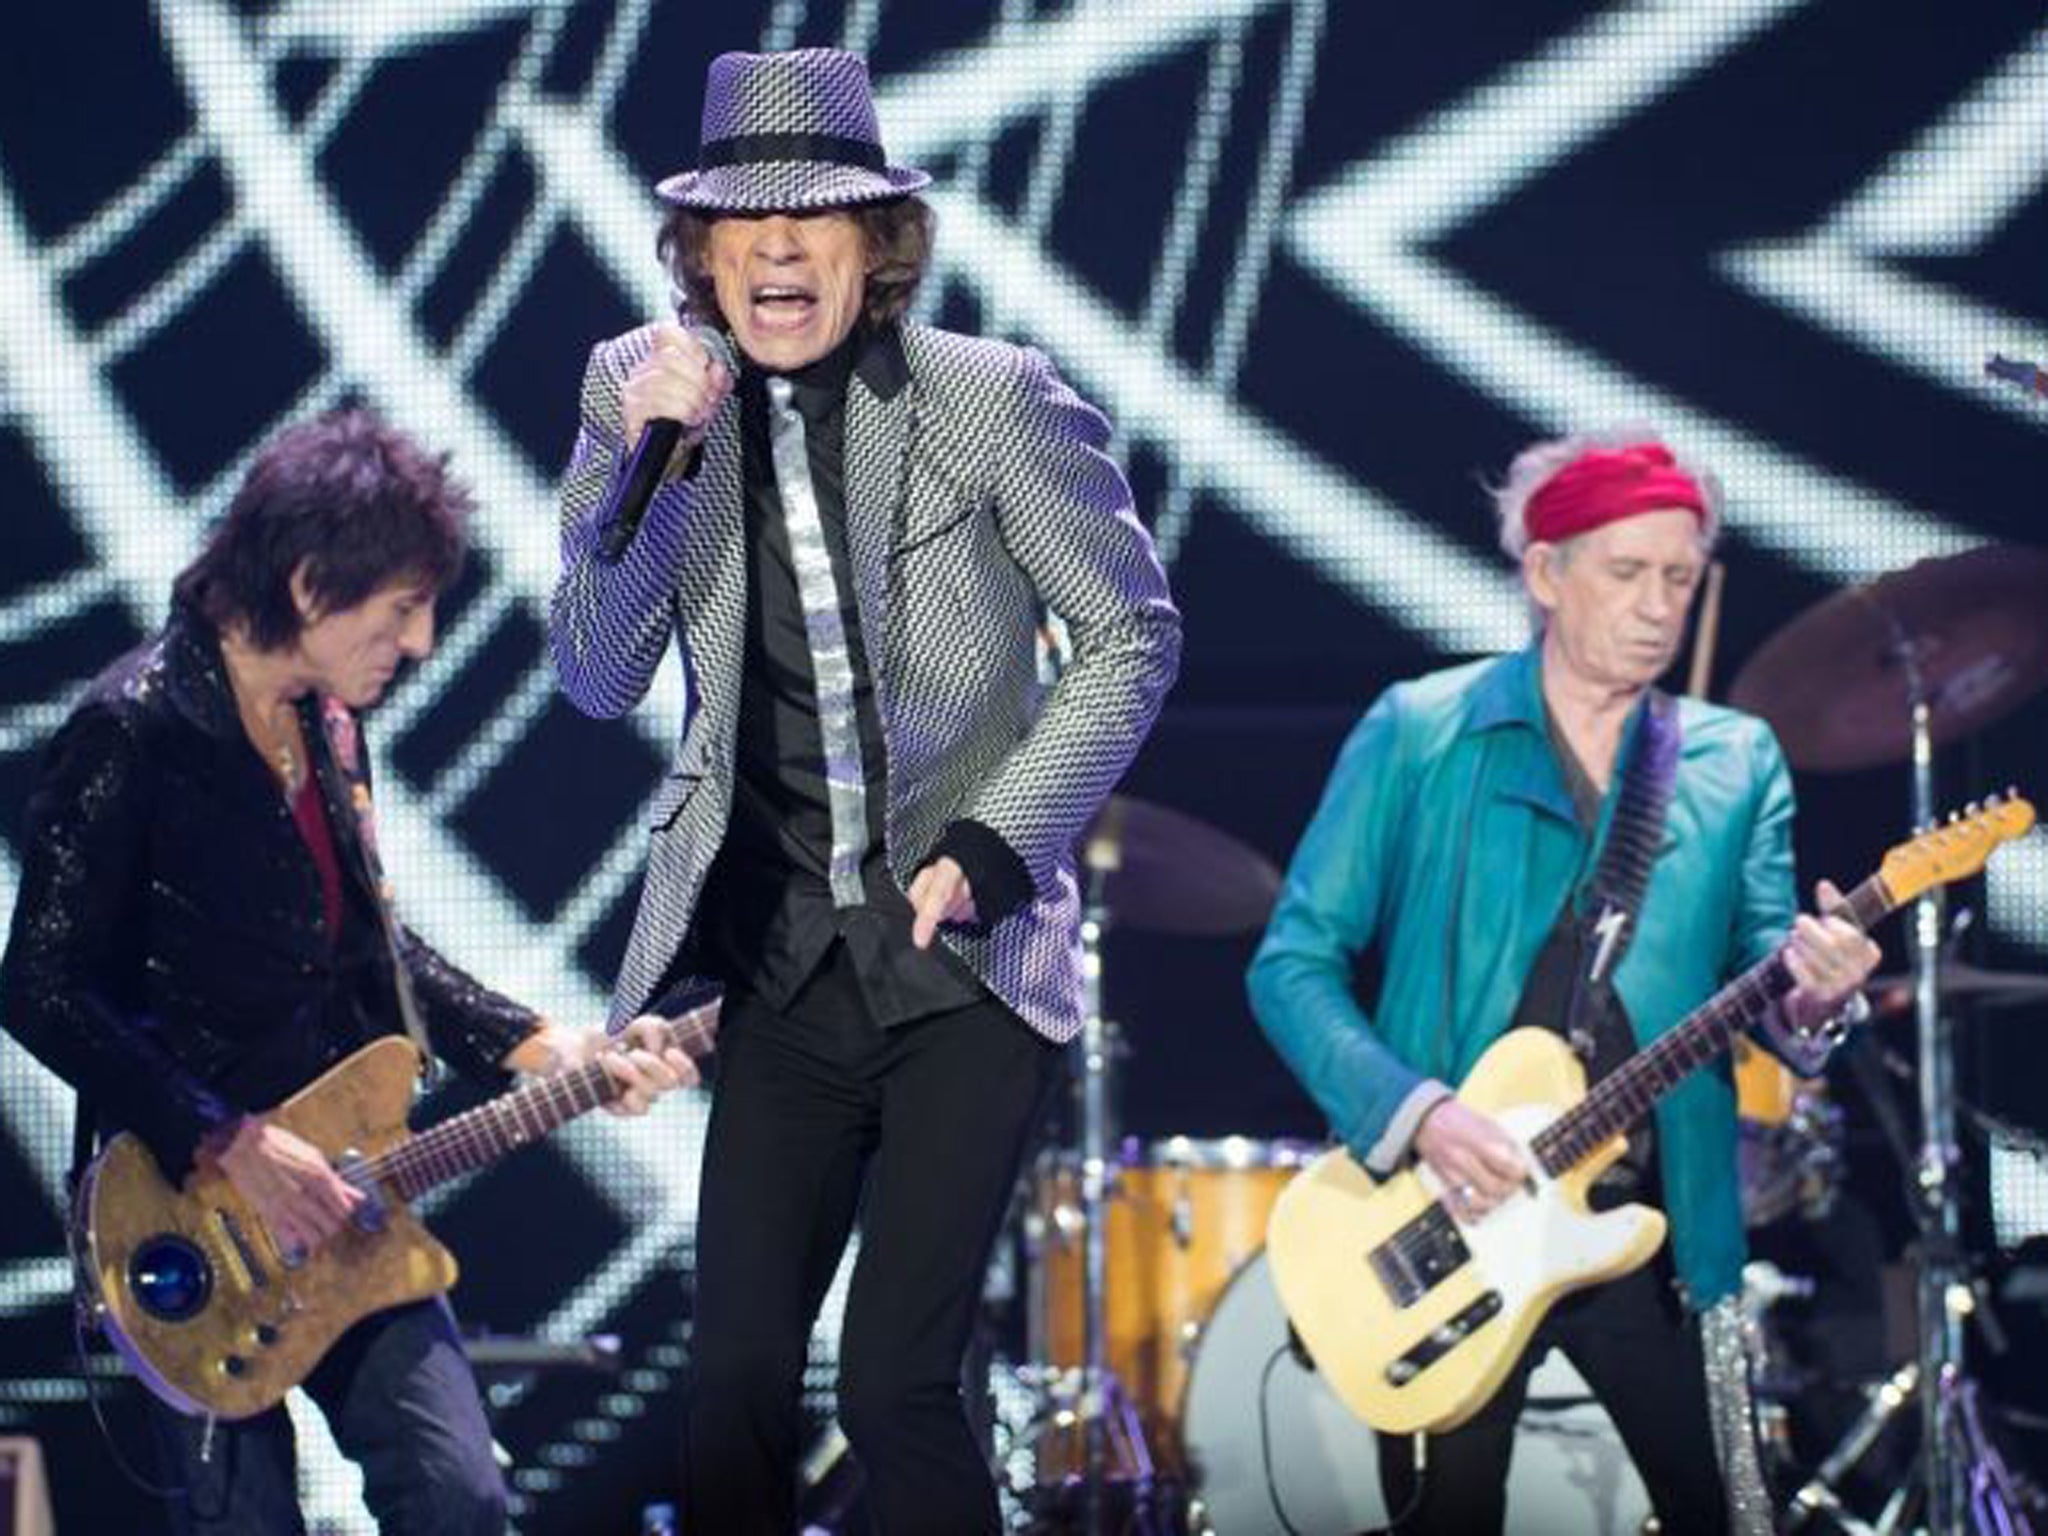 Ronnie Wood, Mick Jagger and Keith Richards performed a welcome selection of classic hits at the 02
Arena last night as part of their 50th-anniversary celebrations